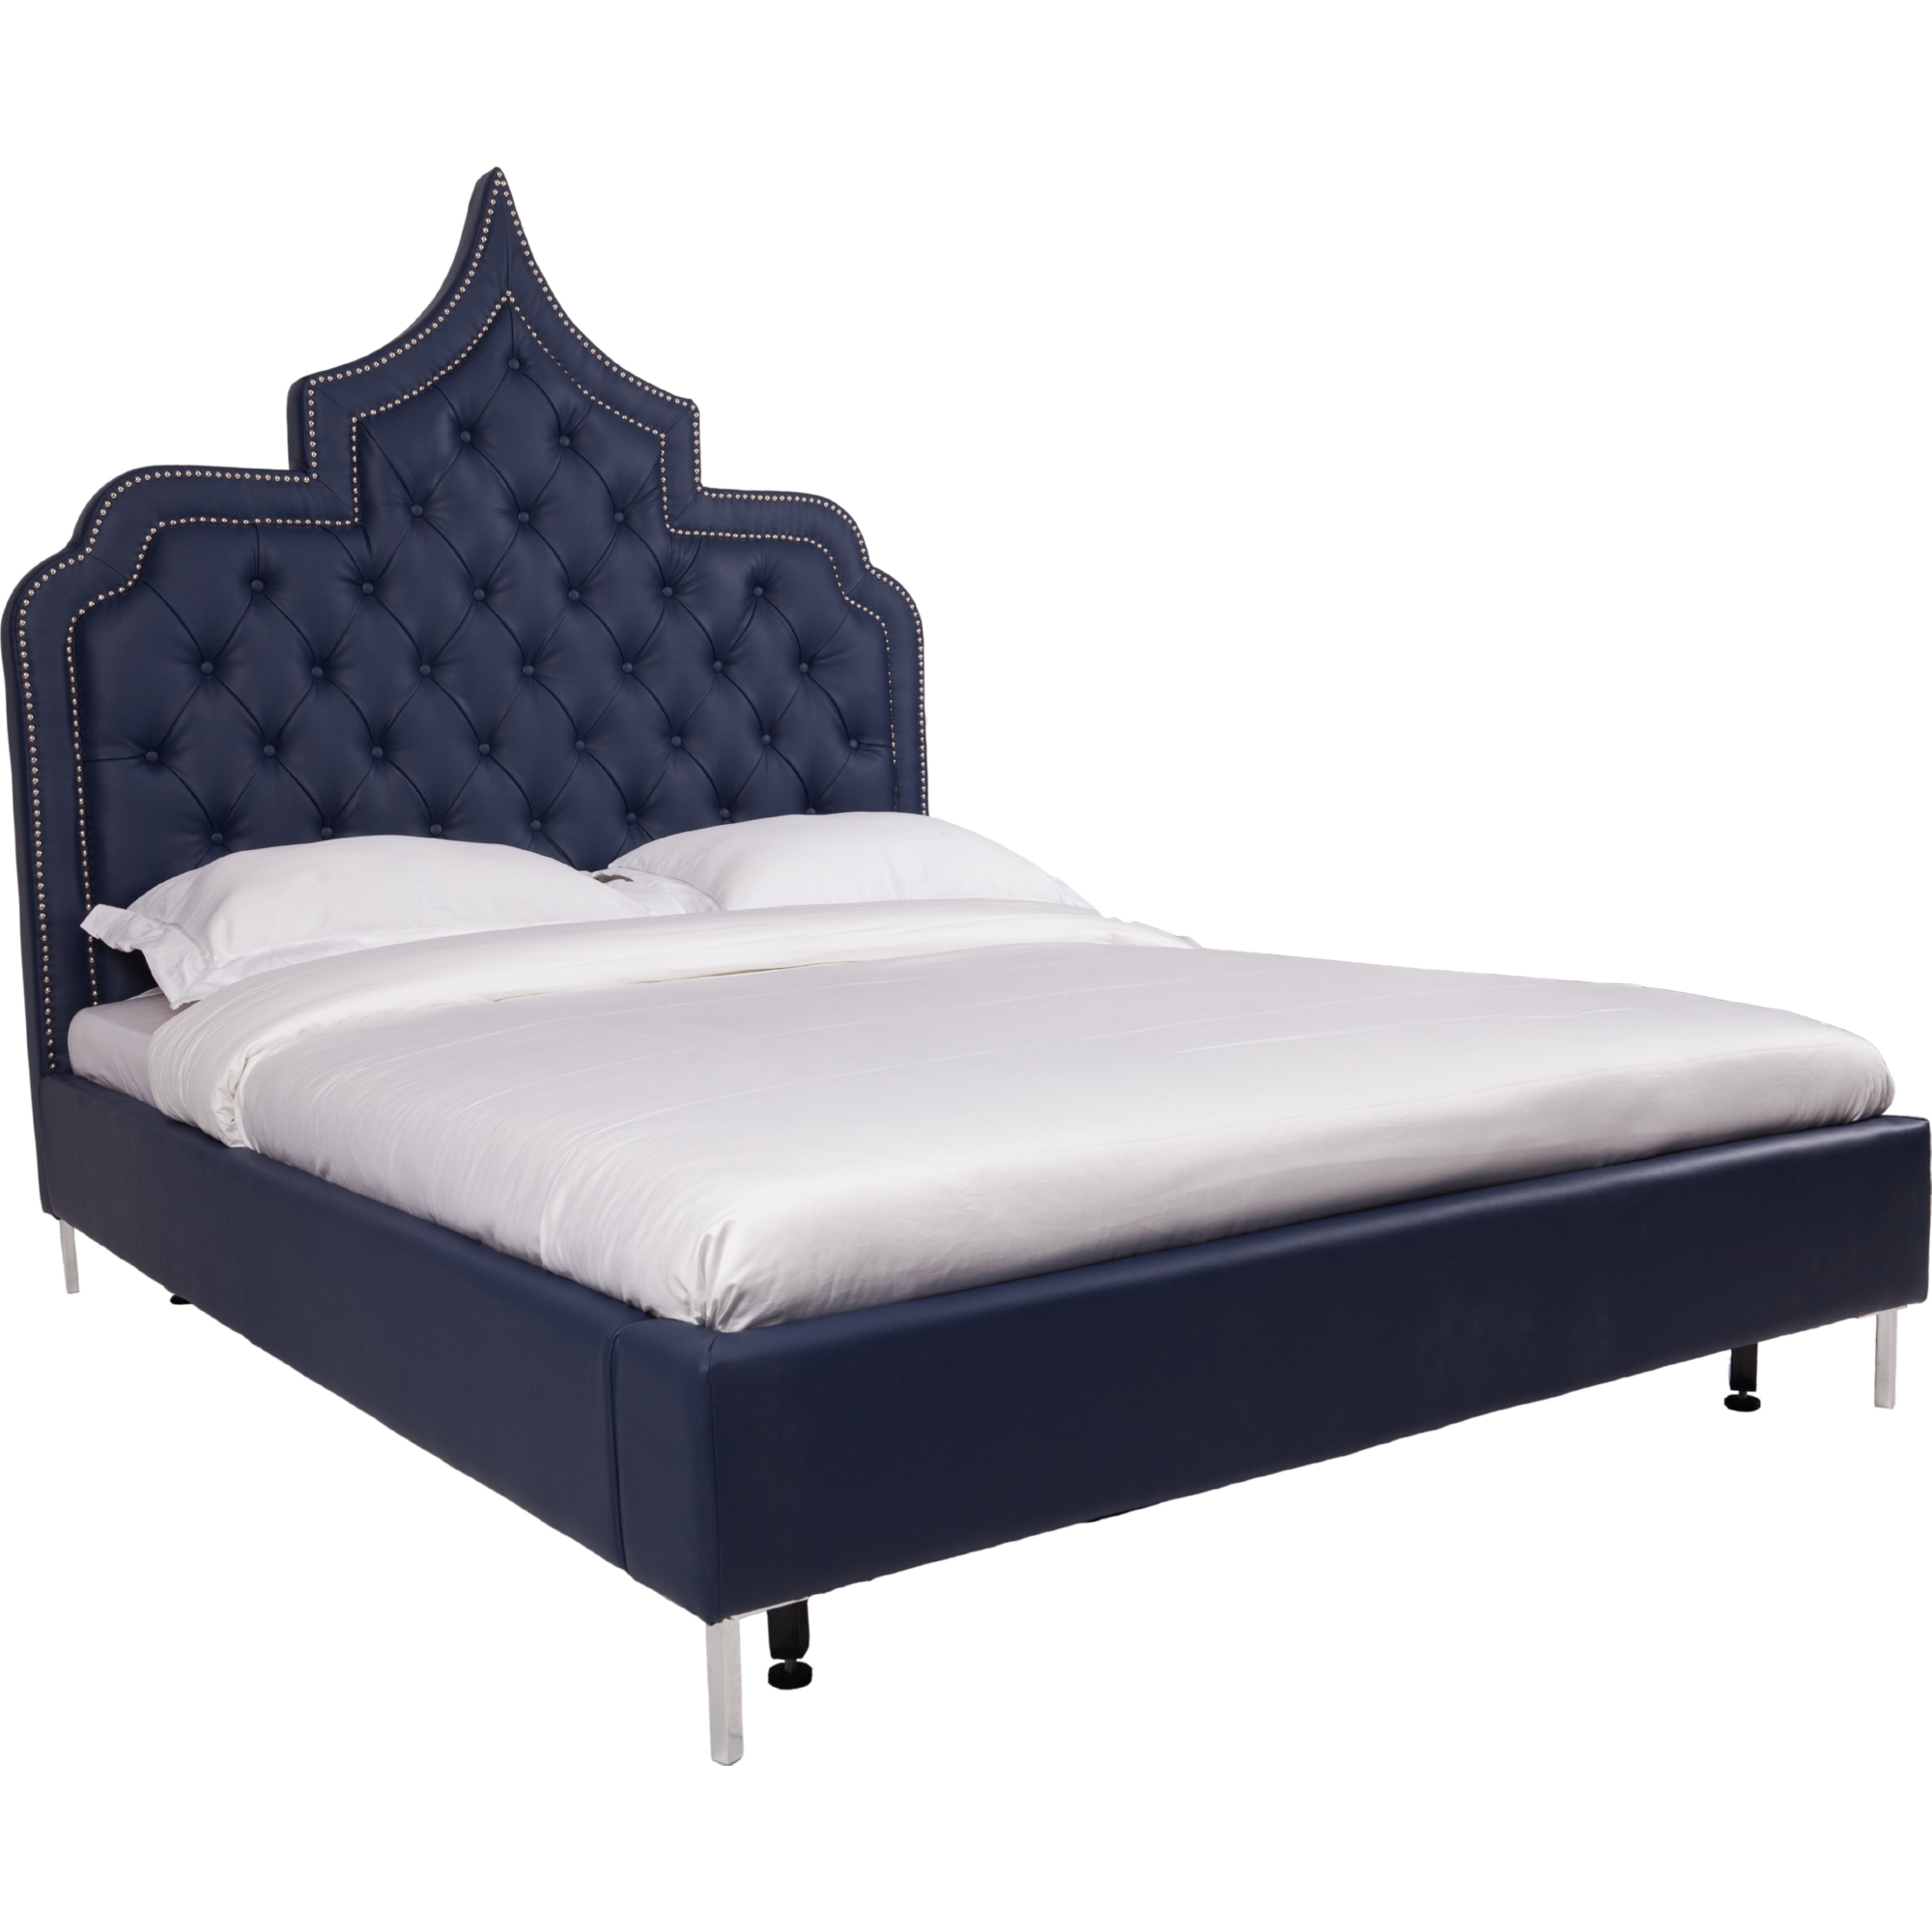 Casablanca Victorian Peak Queen Bed In Navy Blue Tufted Leatherette W Nailhead By Chic Home